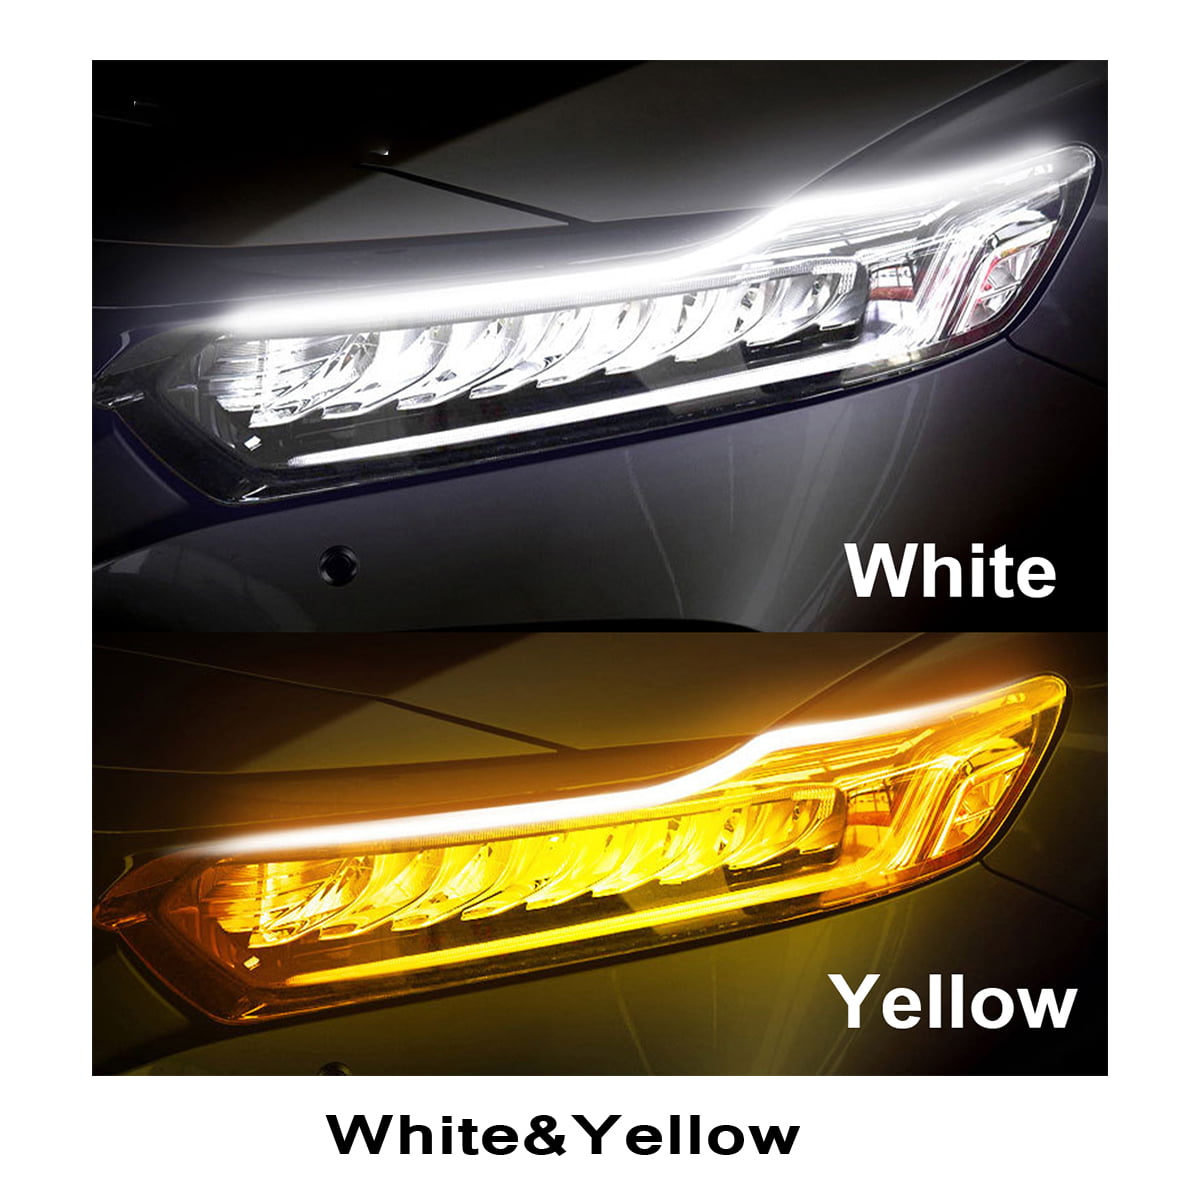 MAXGTRS 2Pcs 11-inch Ultrafine LED Strip Tube Flexible Waterproof Daytime Running Light Yellow Suitable for Switchback Headlight LED Strip,Decorative Lamp,Running Lights,Neon Lights,Turn Signal Light 